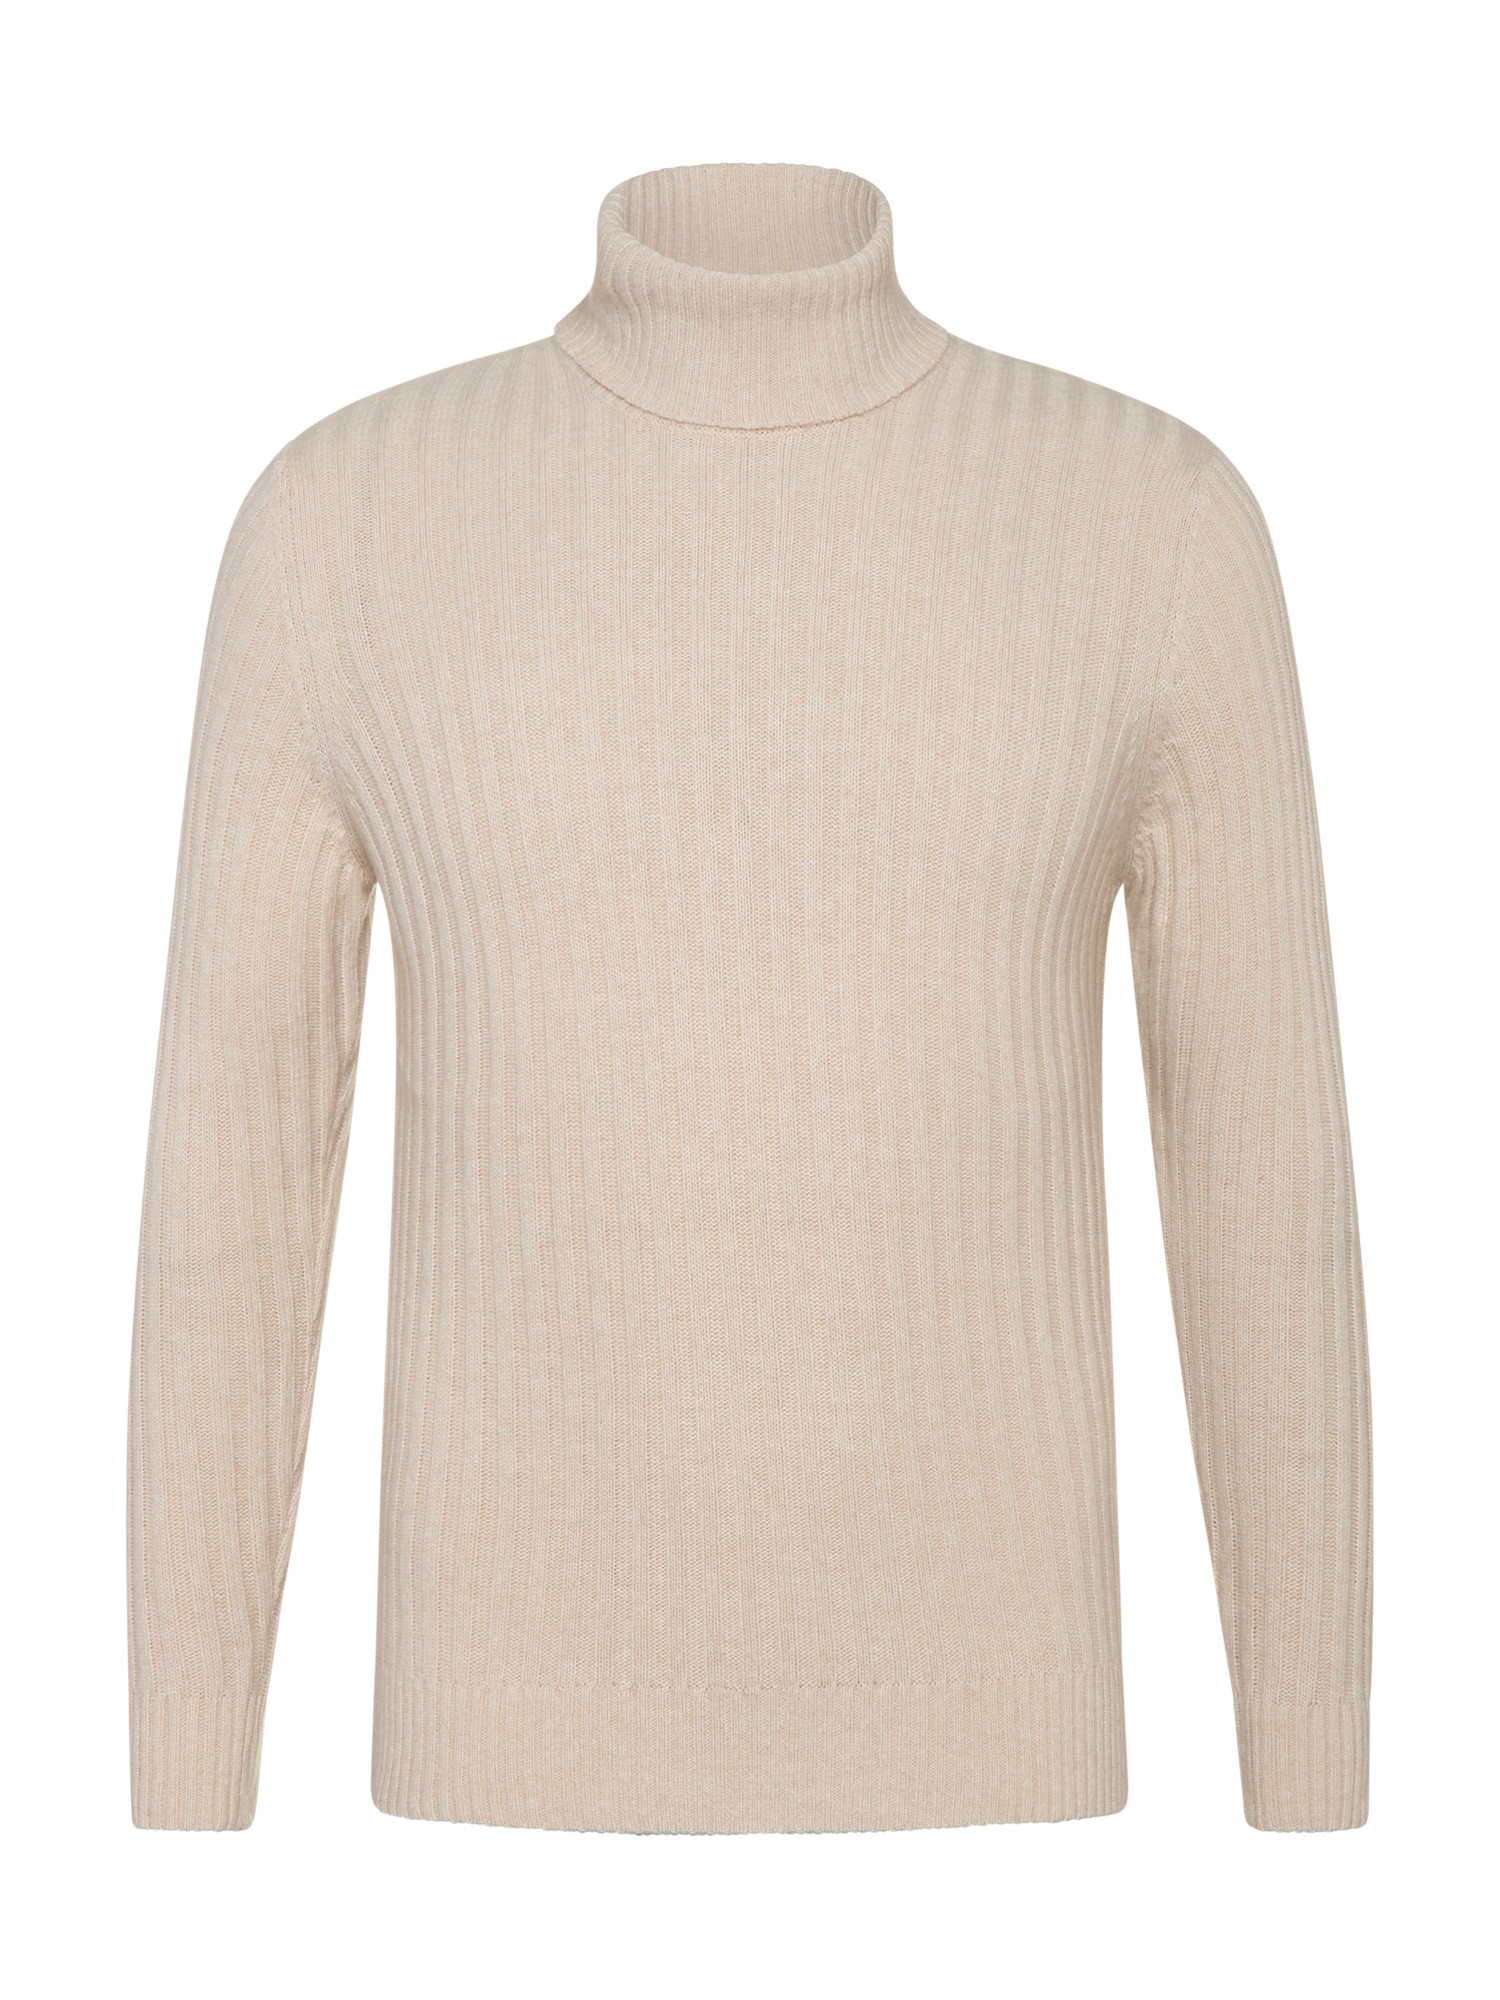 Luca D'Altieri - Cashmere blend and wool turtleneck, White Cream, large image number 0